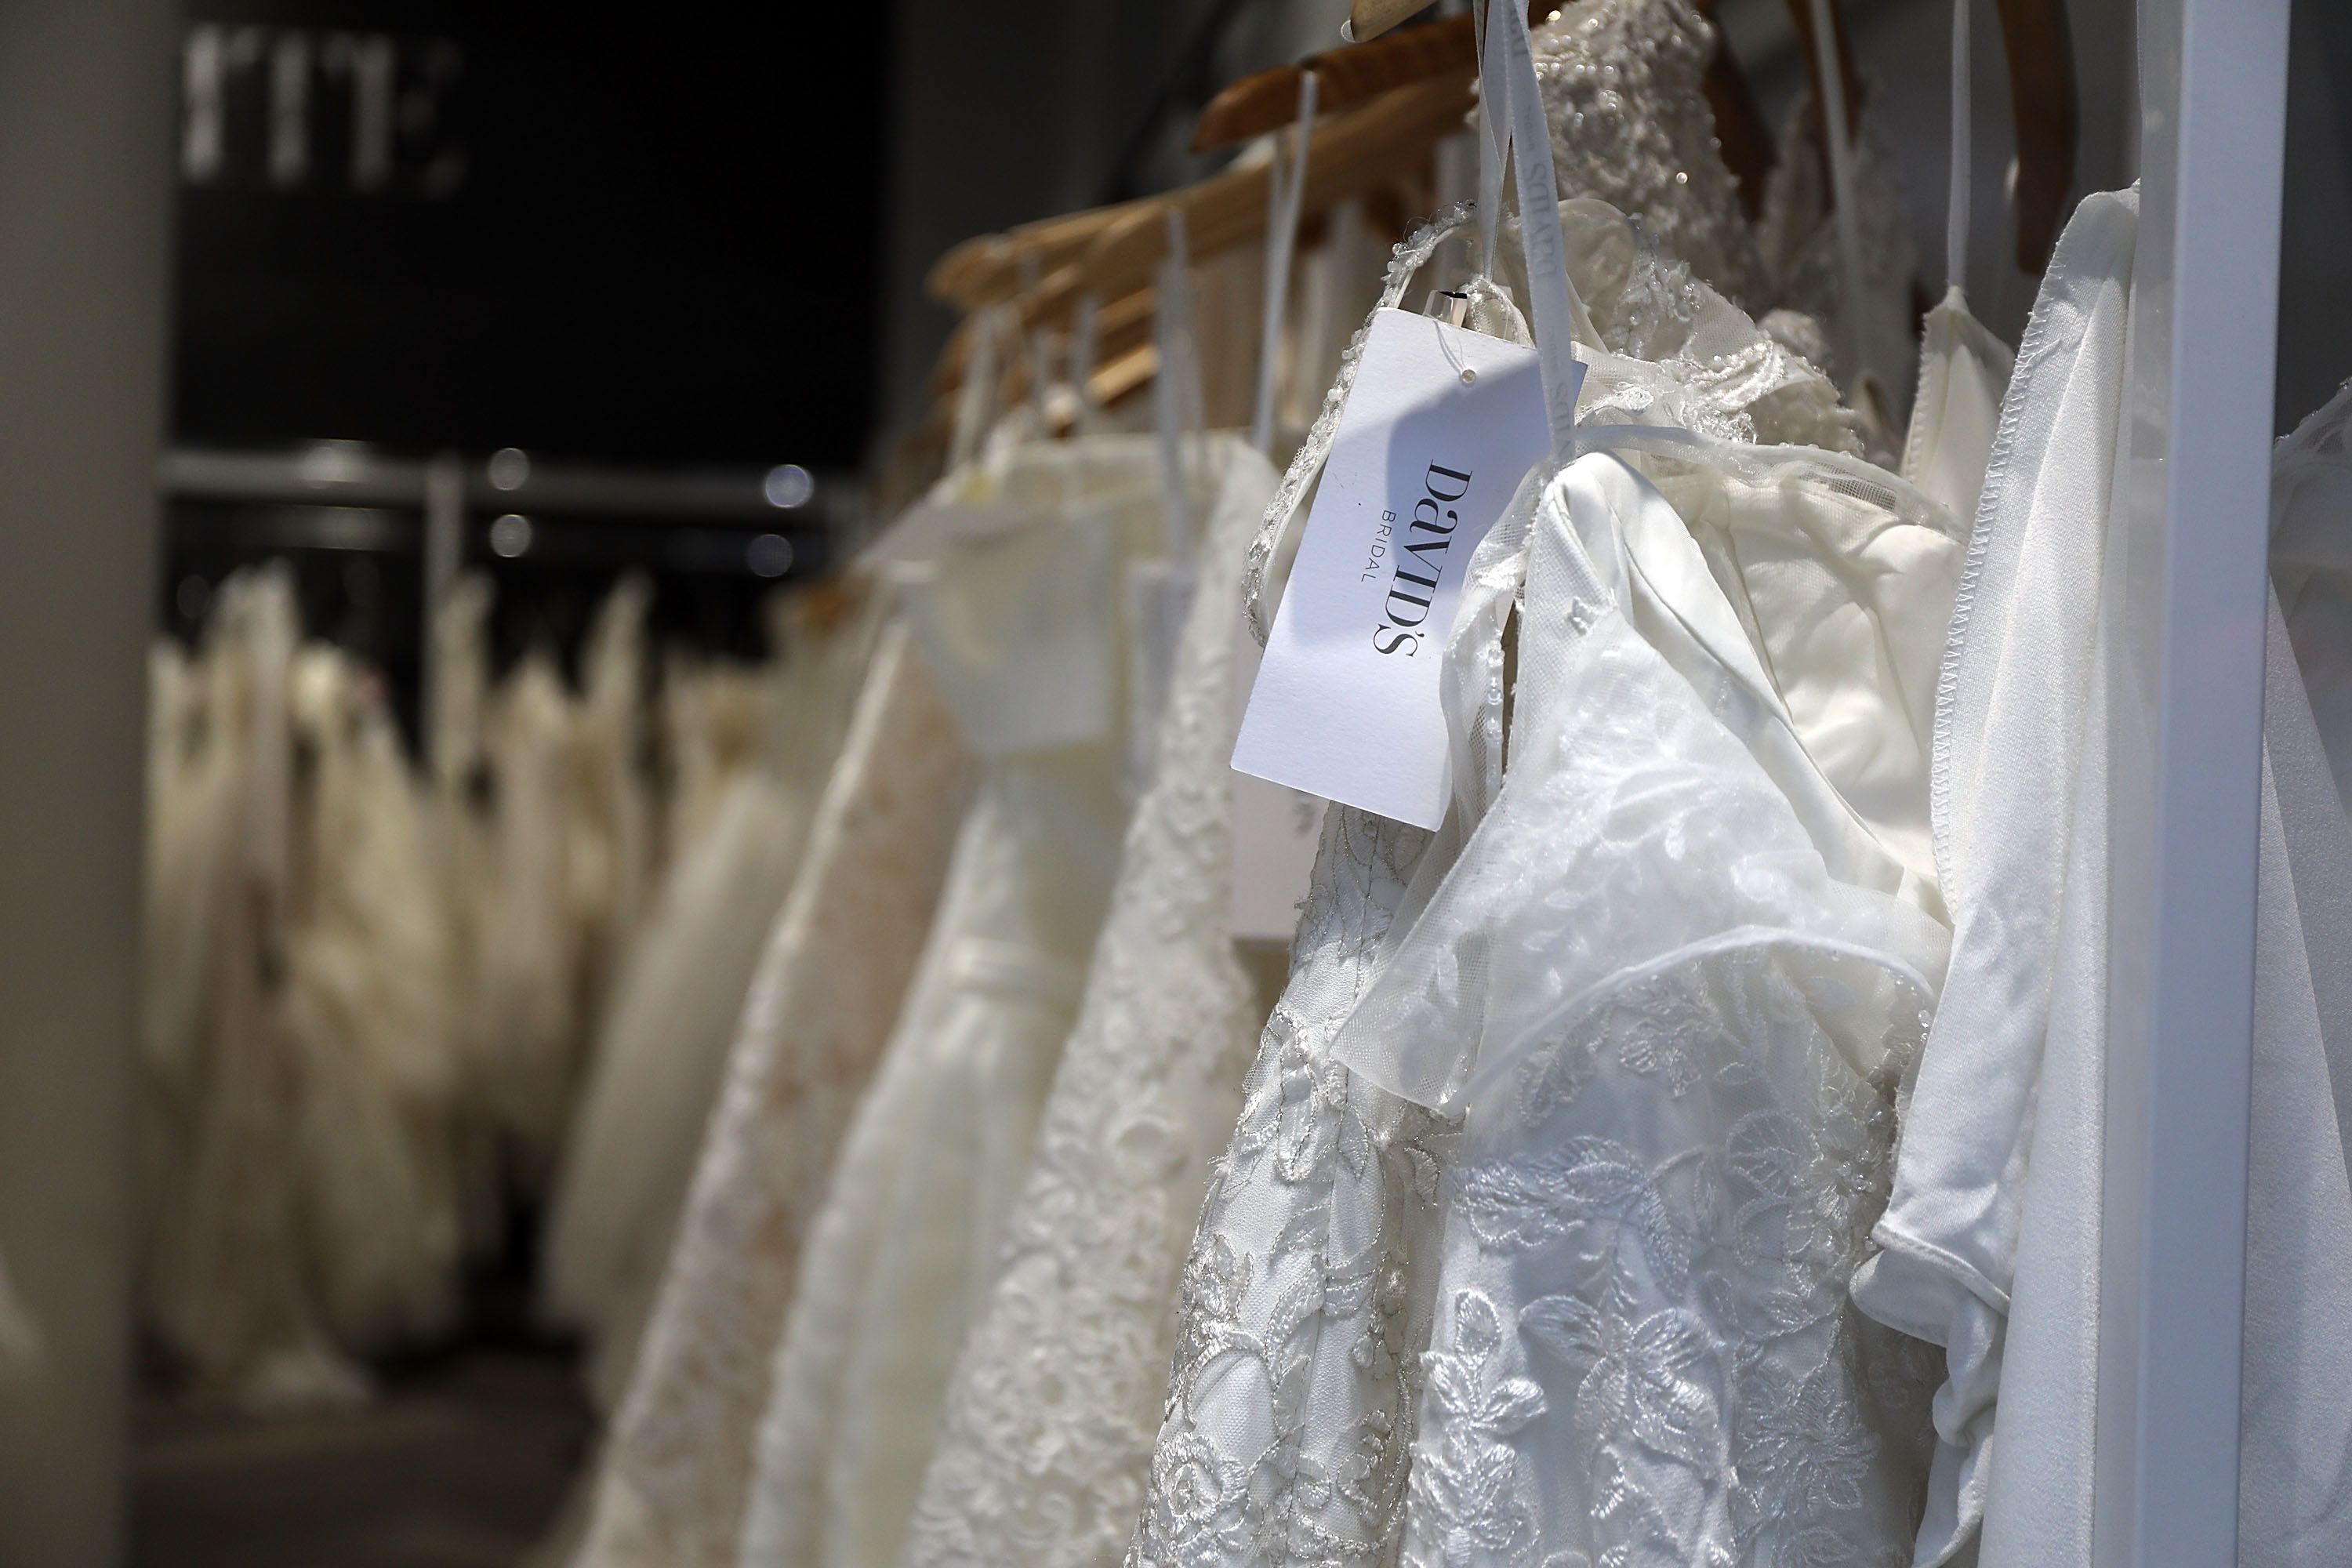 David's Bridal Doesn't Want to Be the Walmart of Weddings Anymore